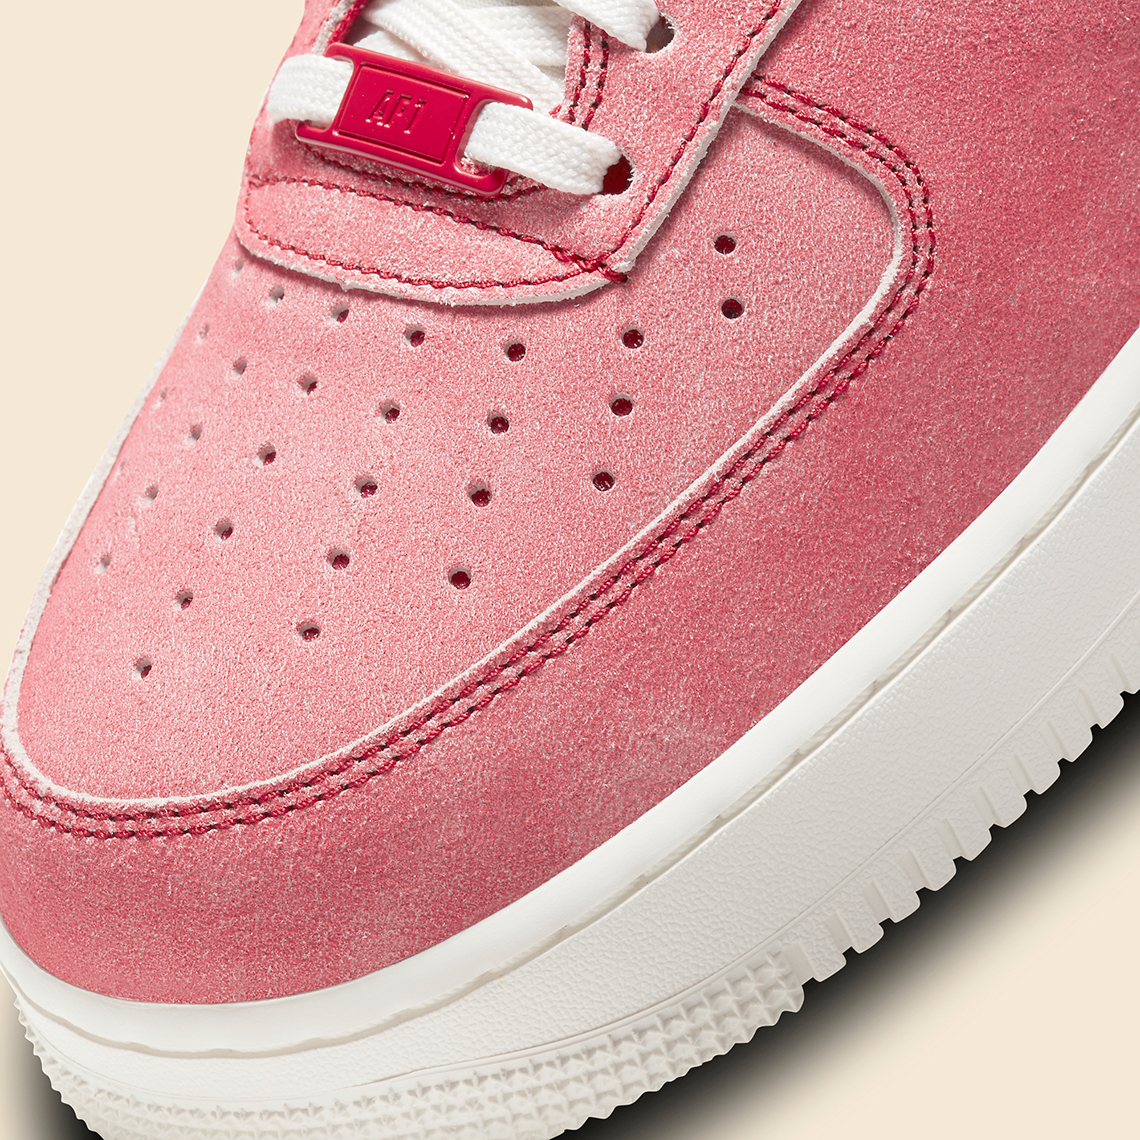 Buy Air Force 1 '07 LV8 'Dusty Red' - DH0265 600